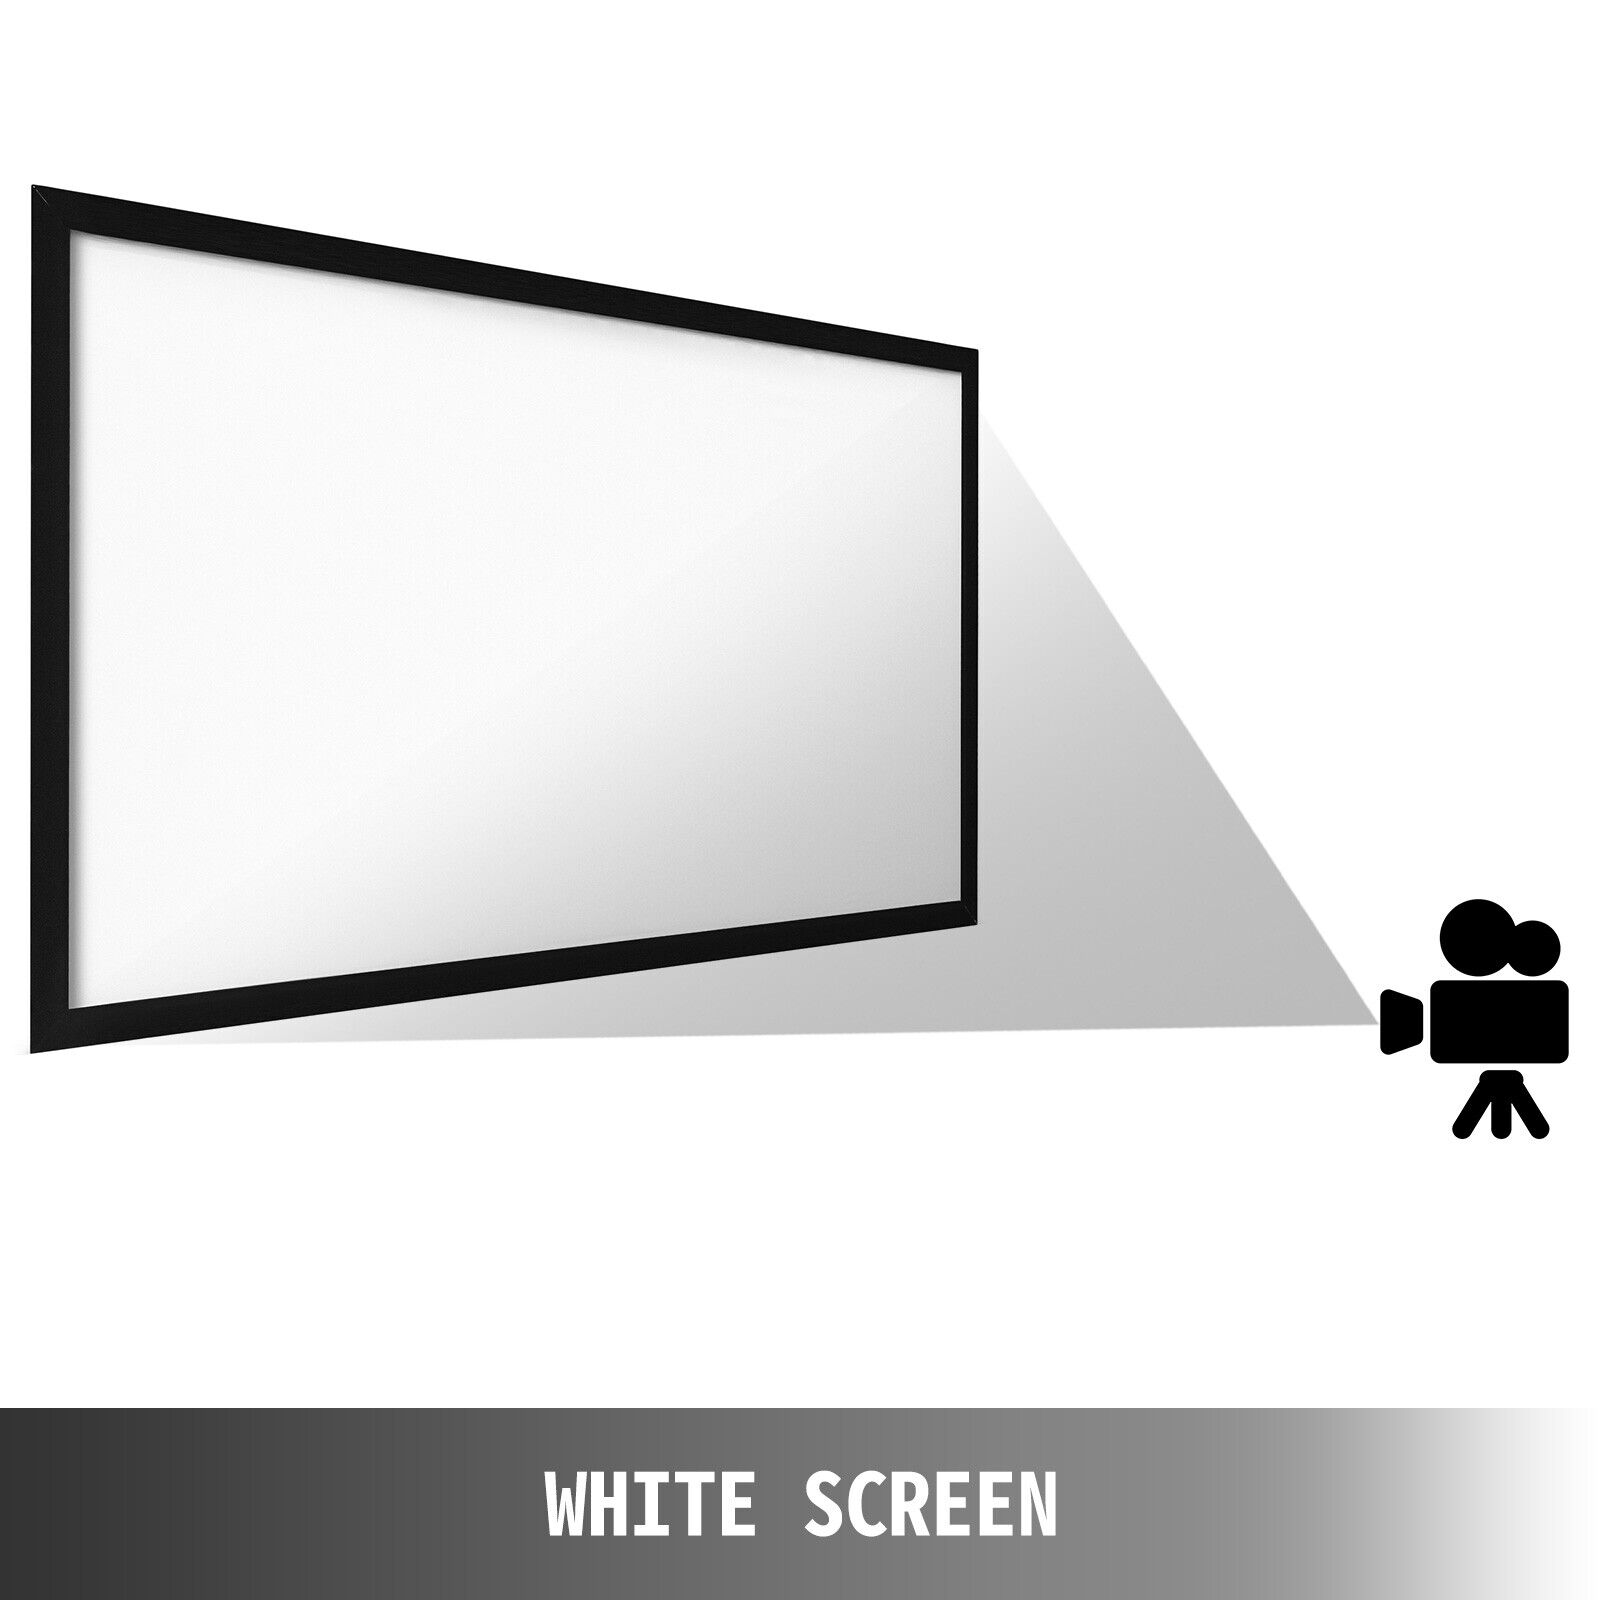 VEVOR 110" 16:9 Projector Screen Projection Hd Home Theatre Outdoor Portable